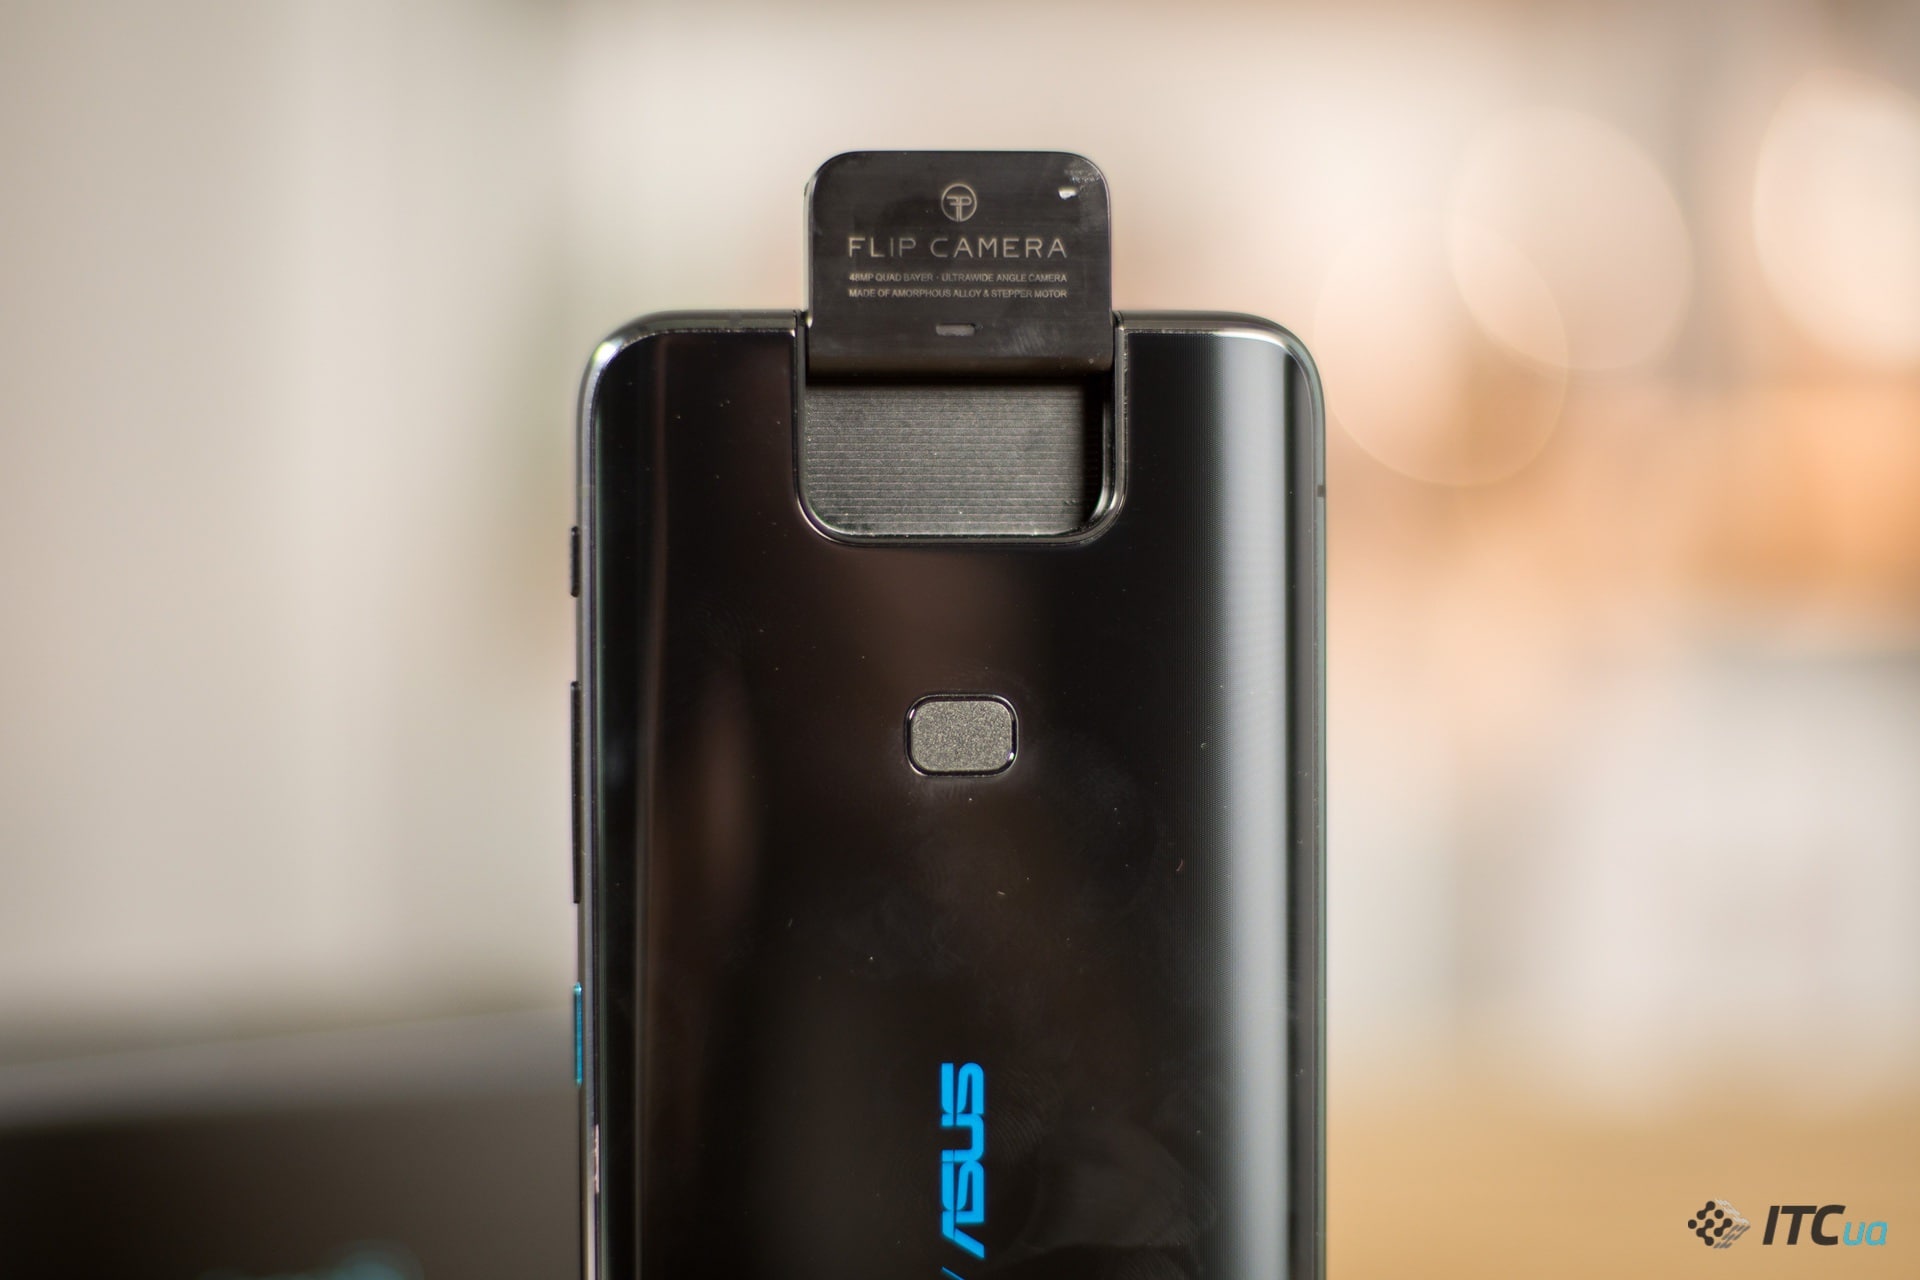 ZenFone 6 - review of the flagship smartphone ASUS